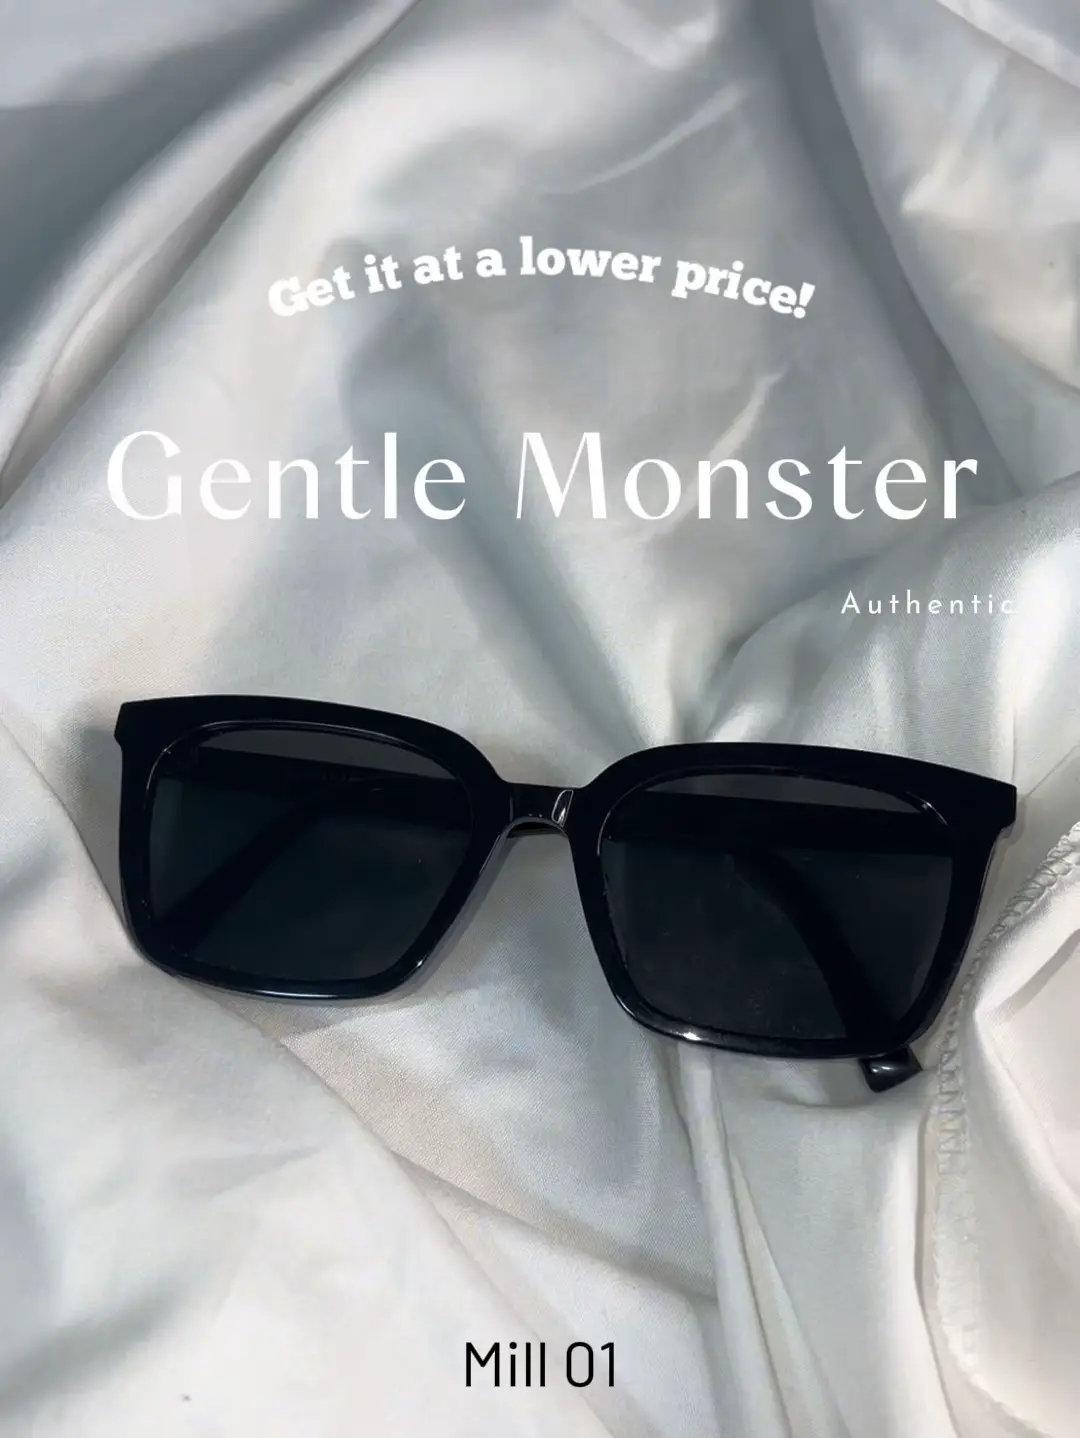  Authentic Gentle Monster Fashion Sunglasses for Women